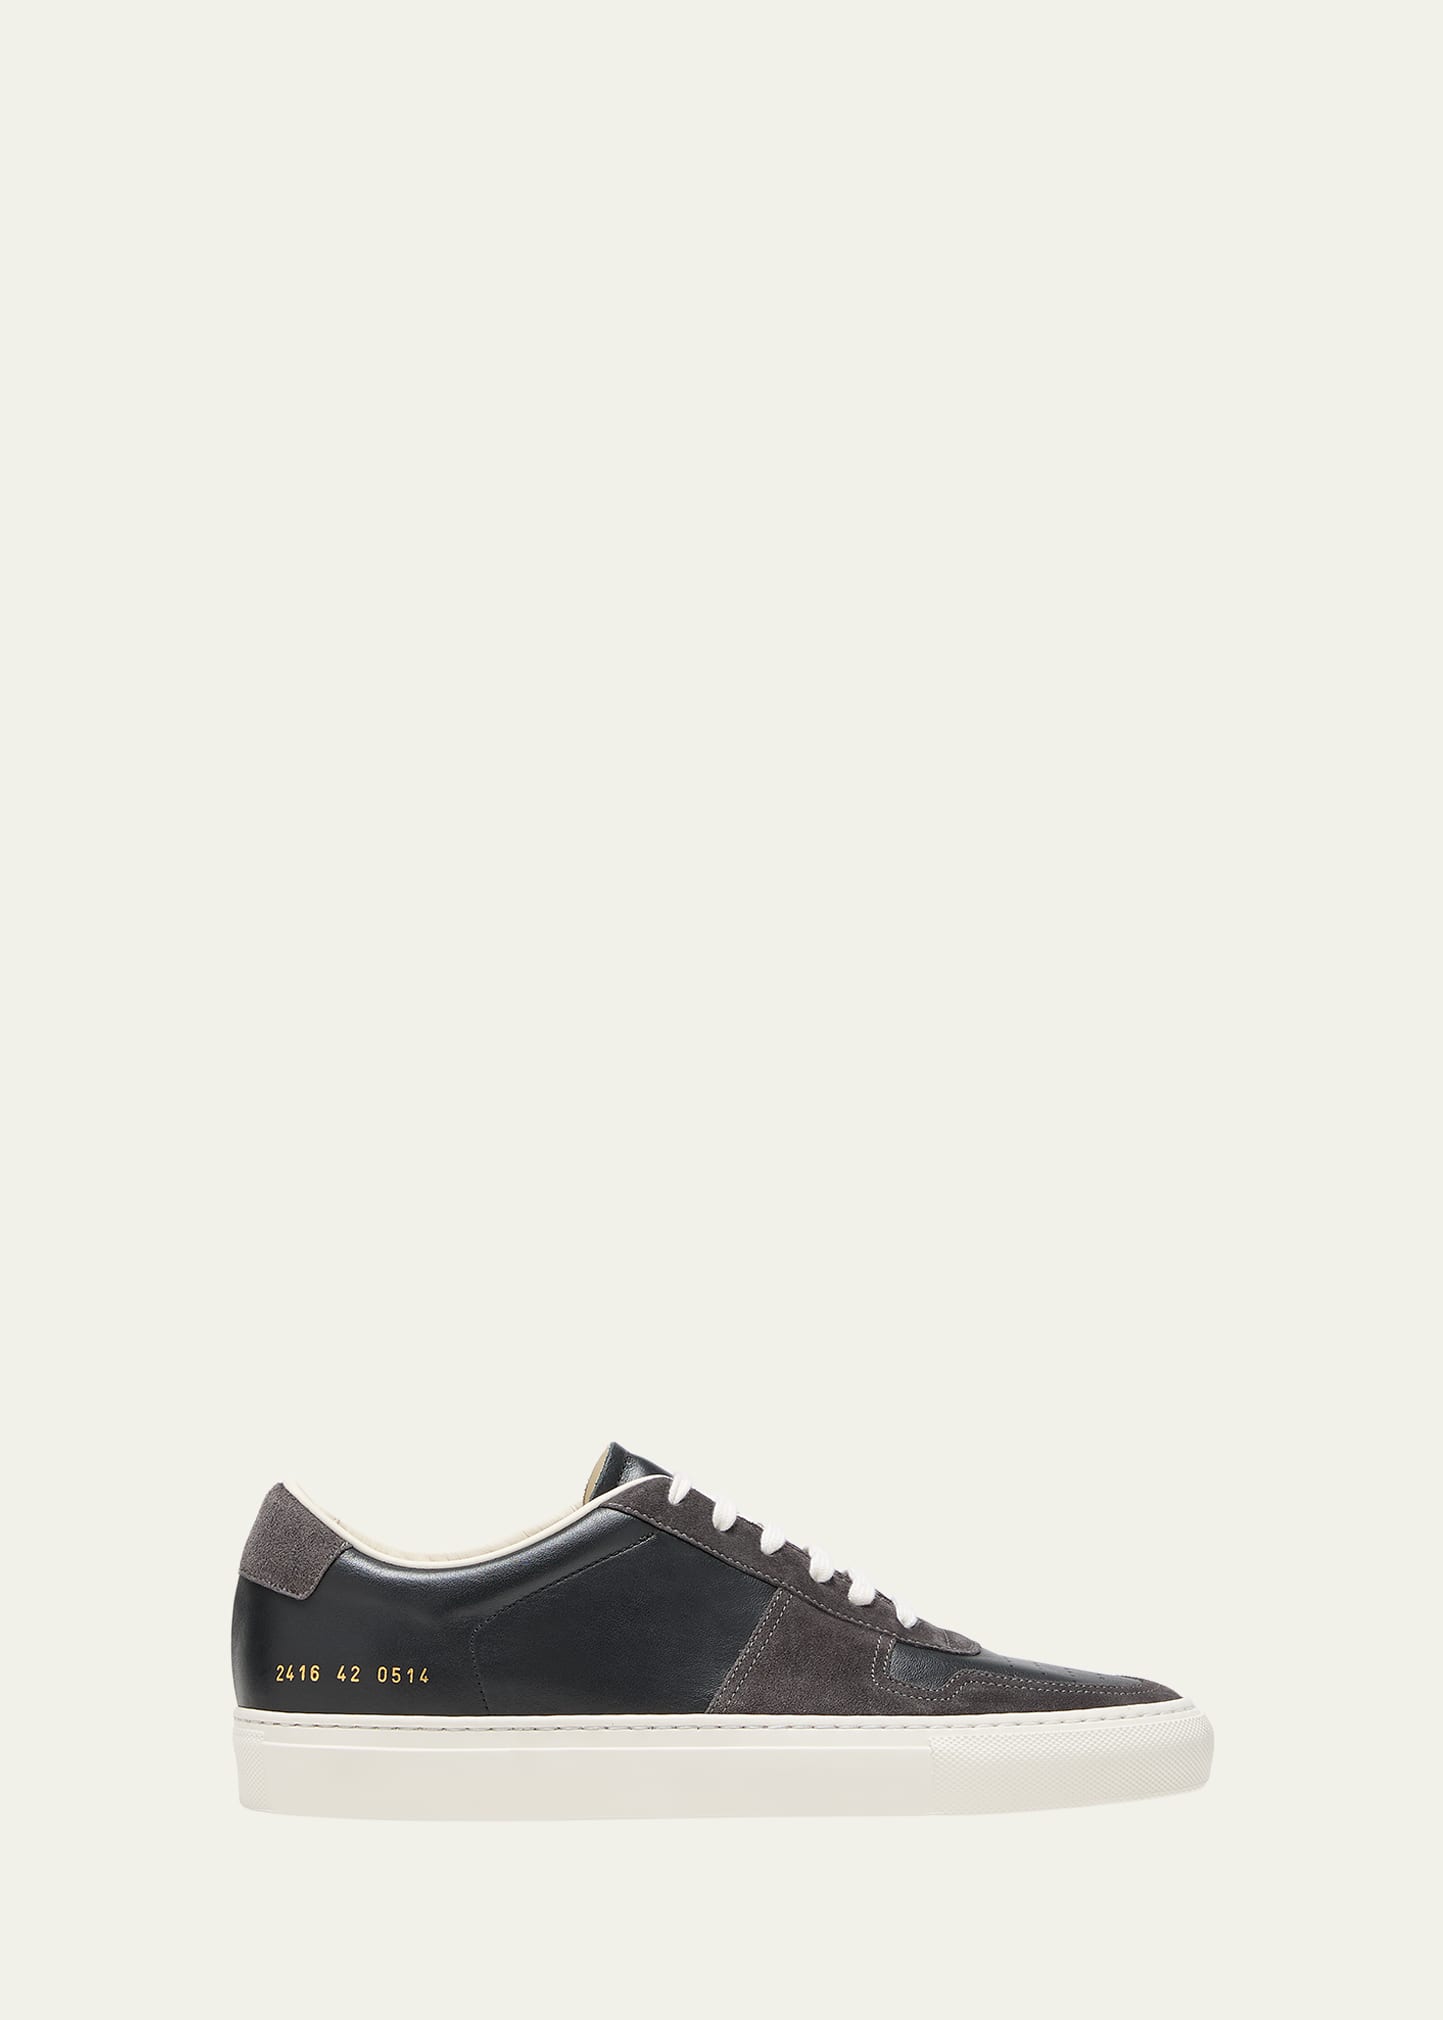 Shop Common Projects Men's Bball Duo Napa And Suede Low-top Sneakers In Charcoal